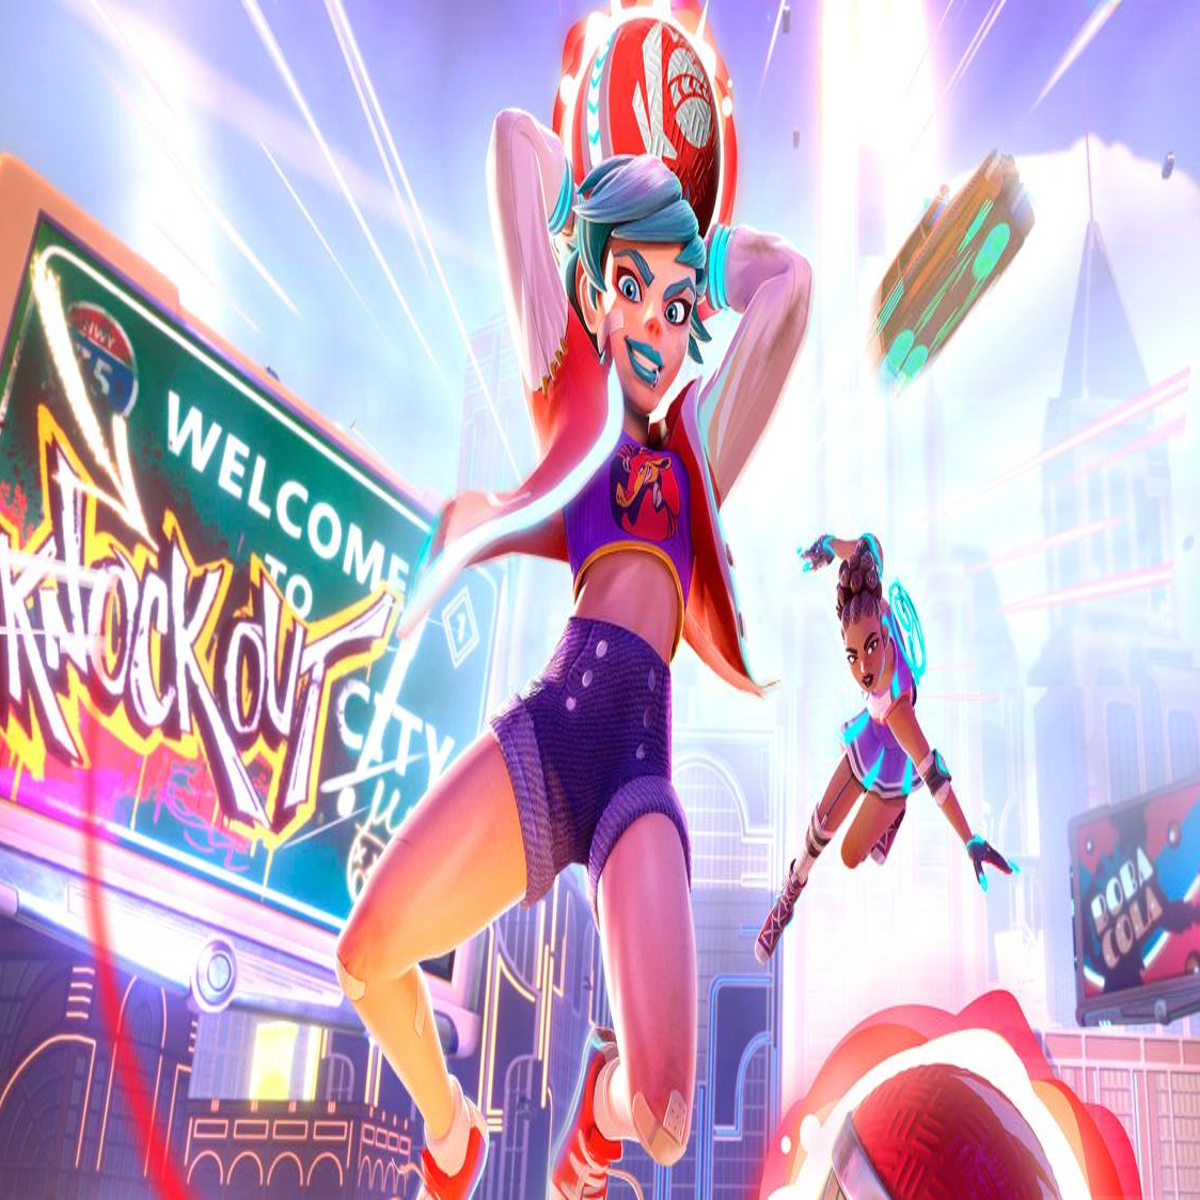 Knockout City  Ahora es Free to Play –